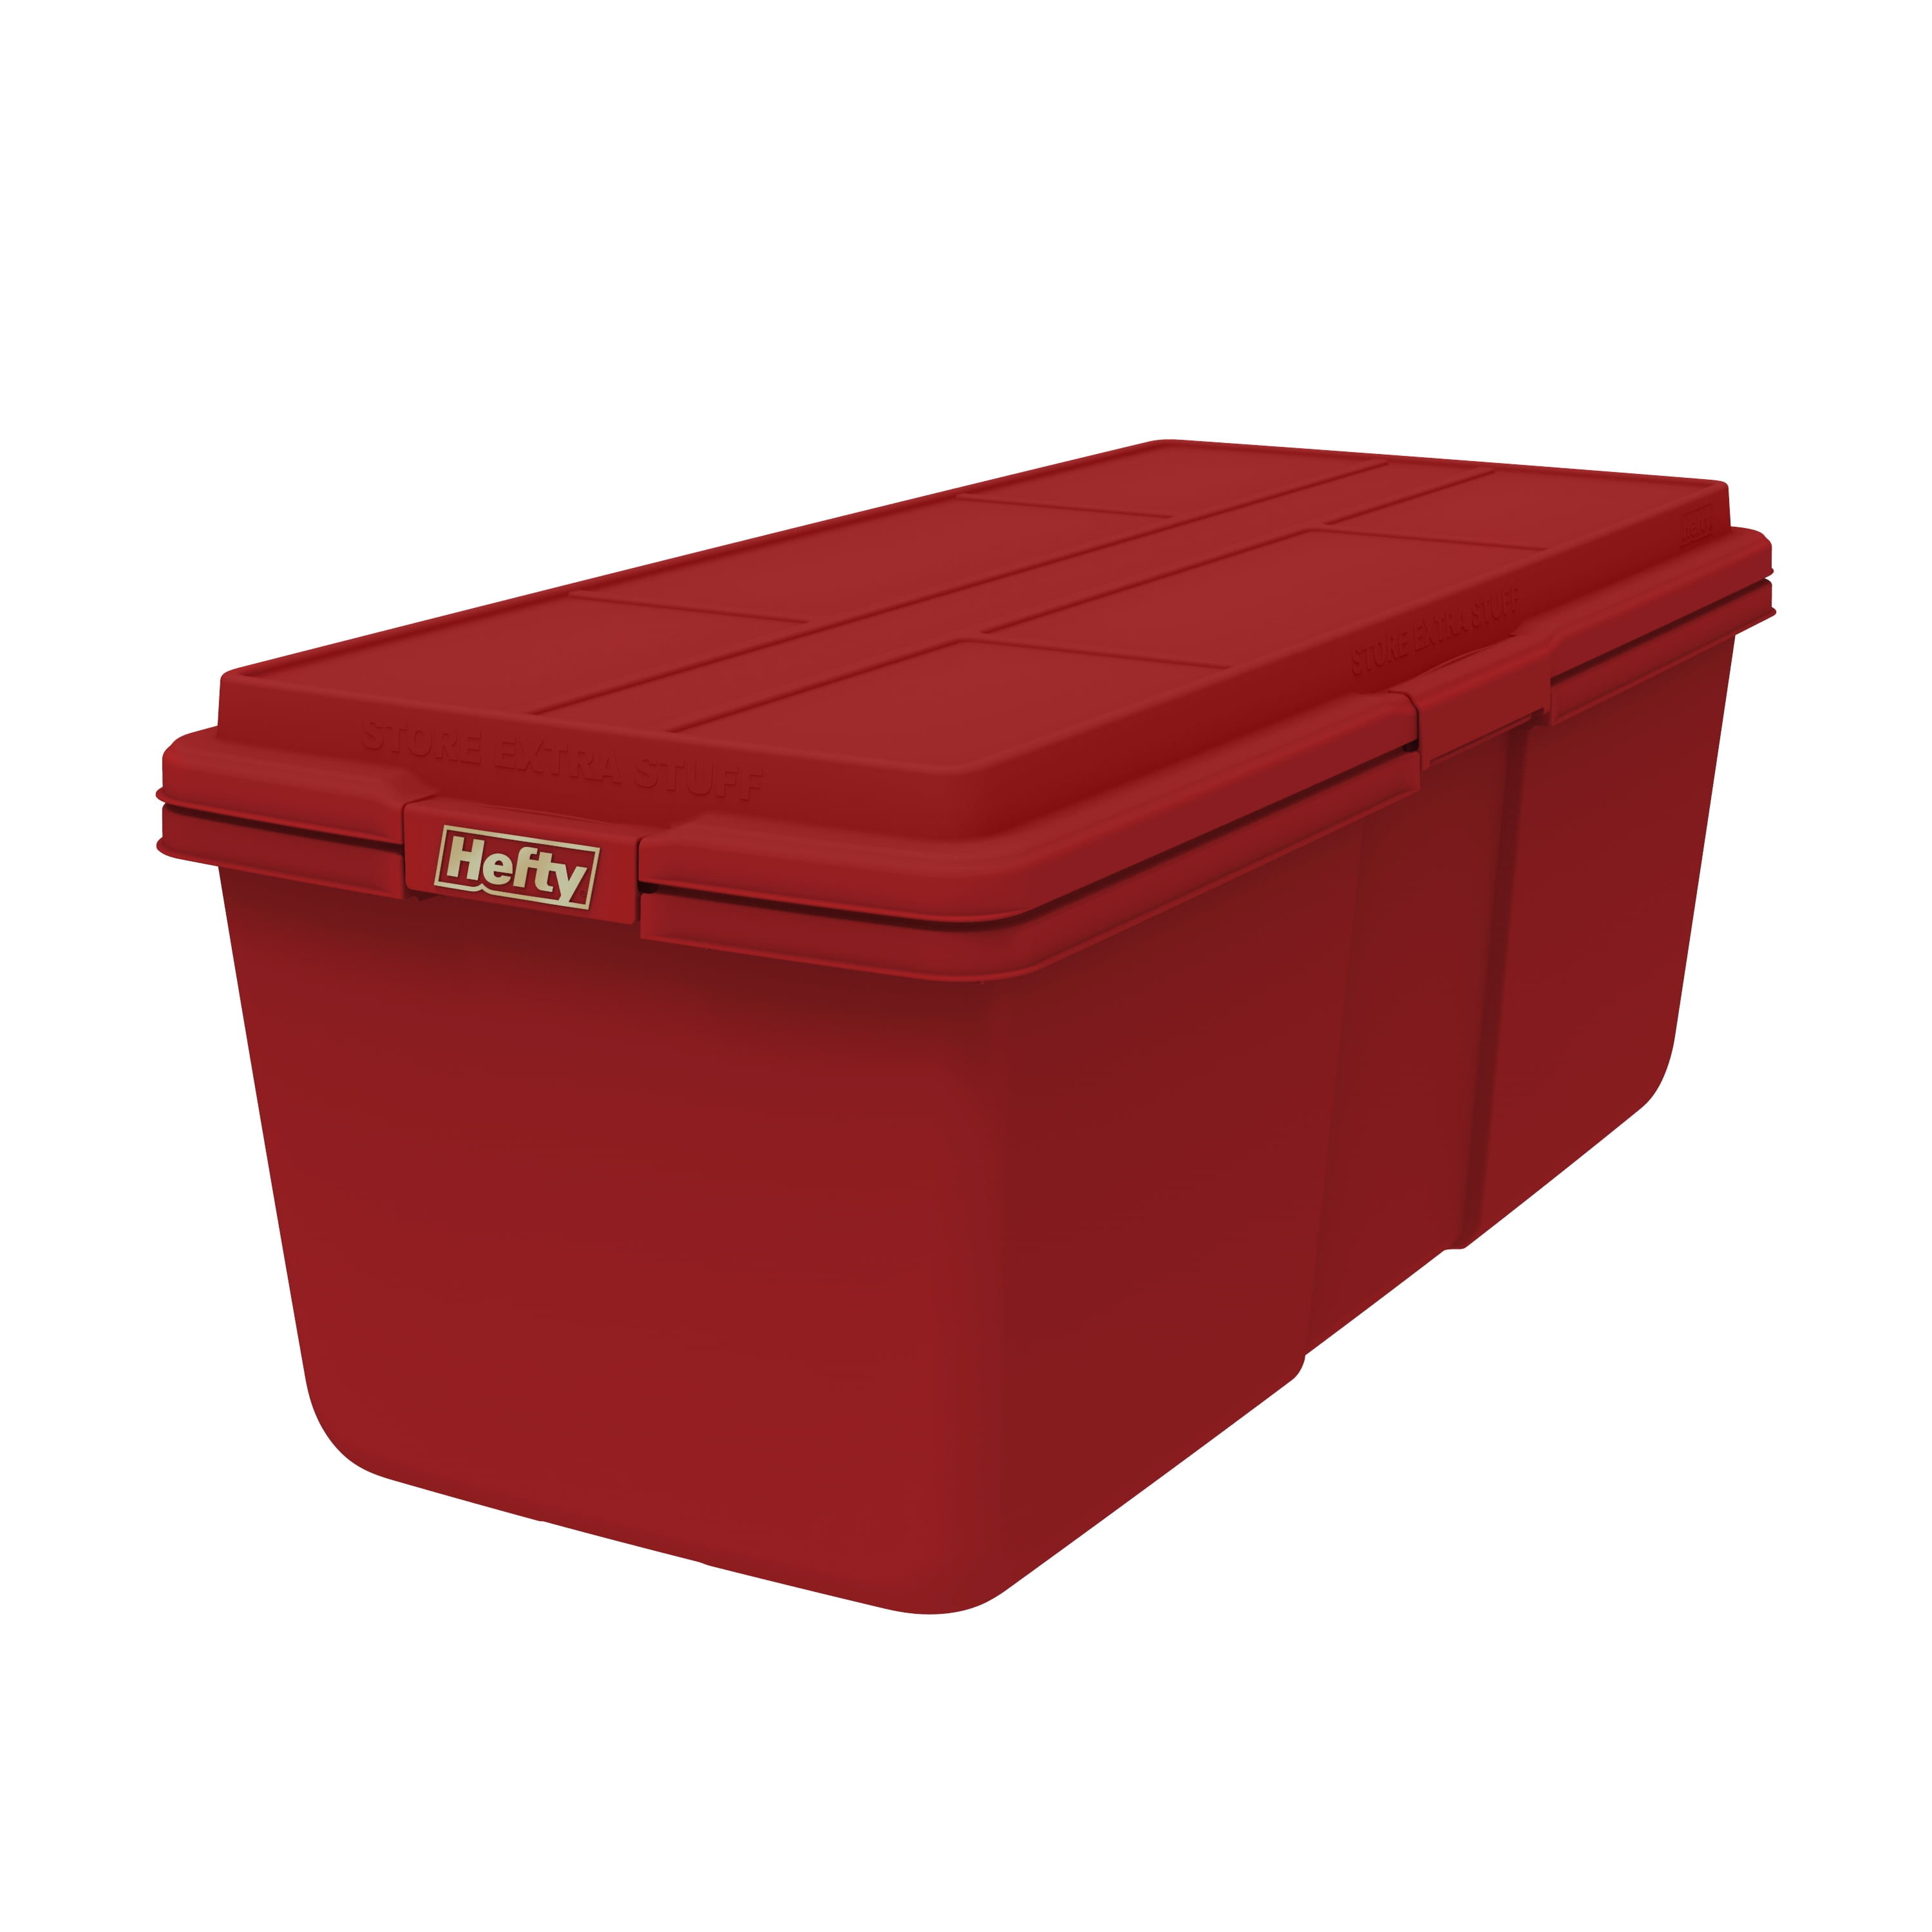 Hefty 28 gal Plastic Holiday Latched Storage Tote, Red